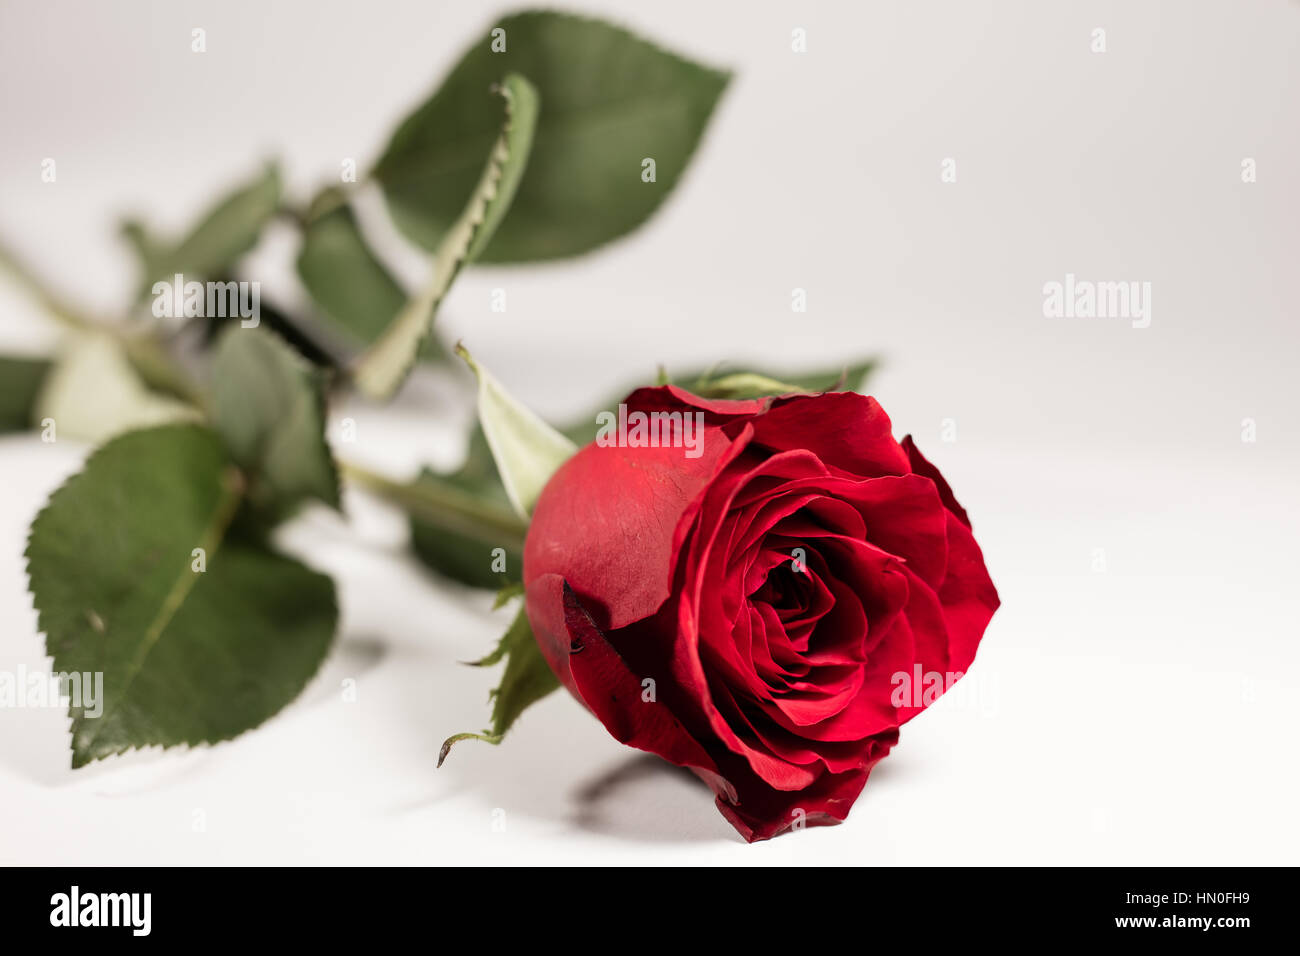 Red rose on white background Stock Photo